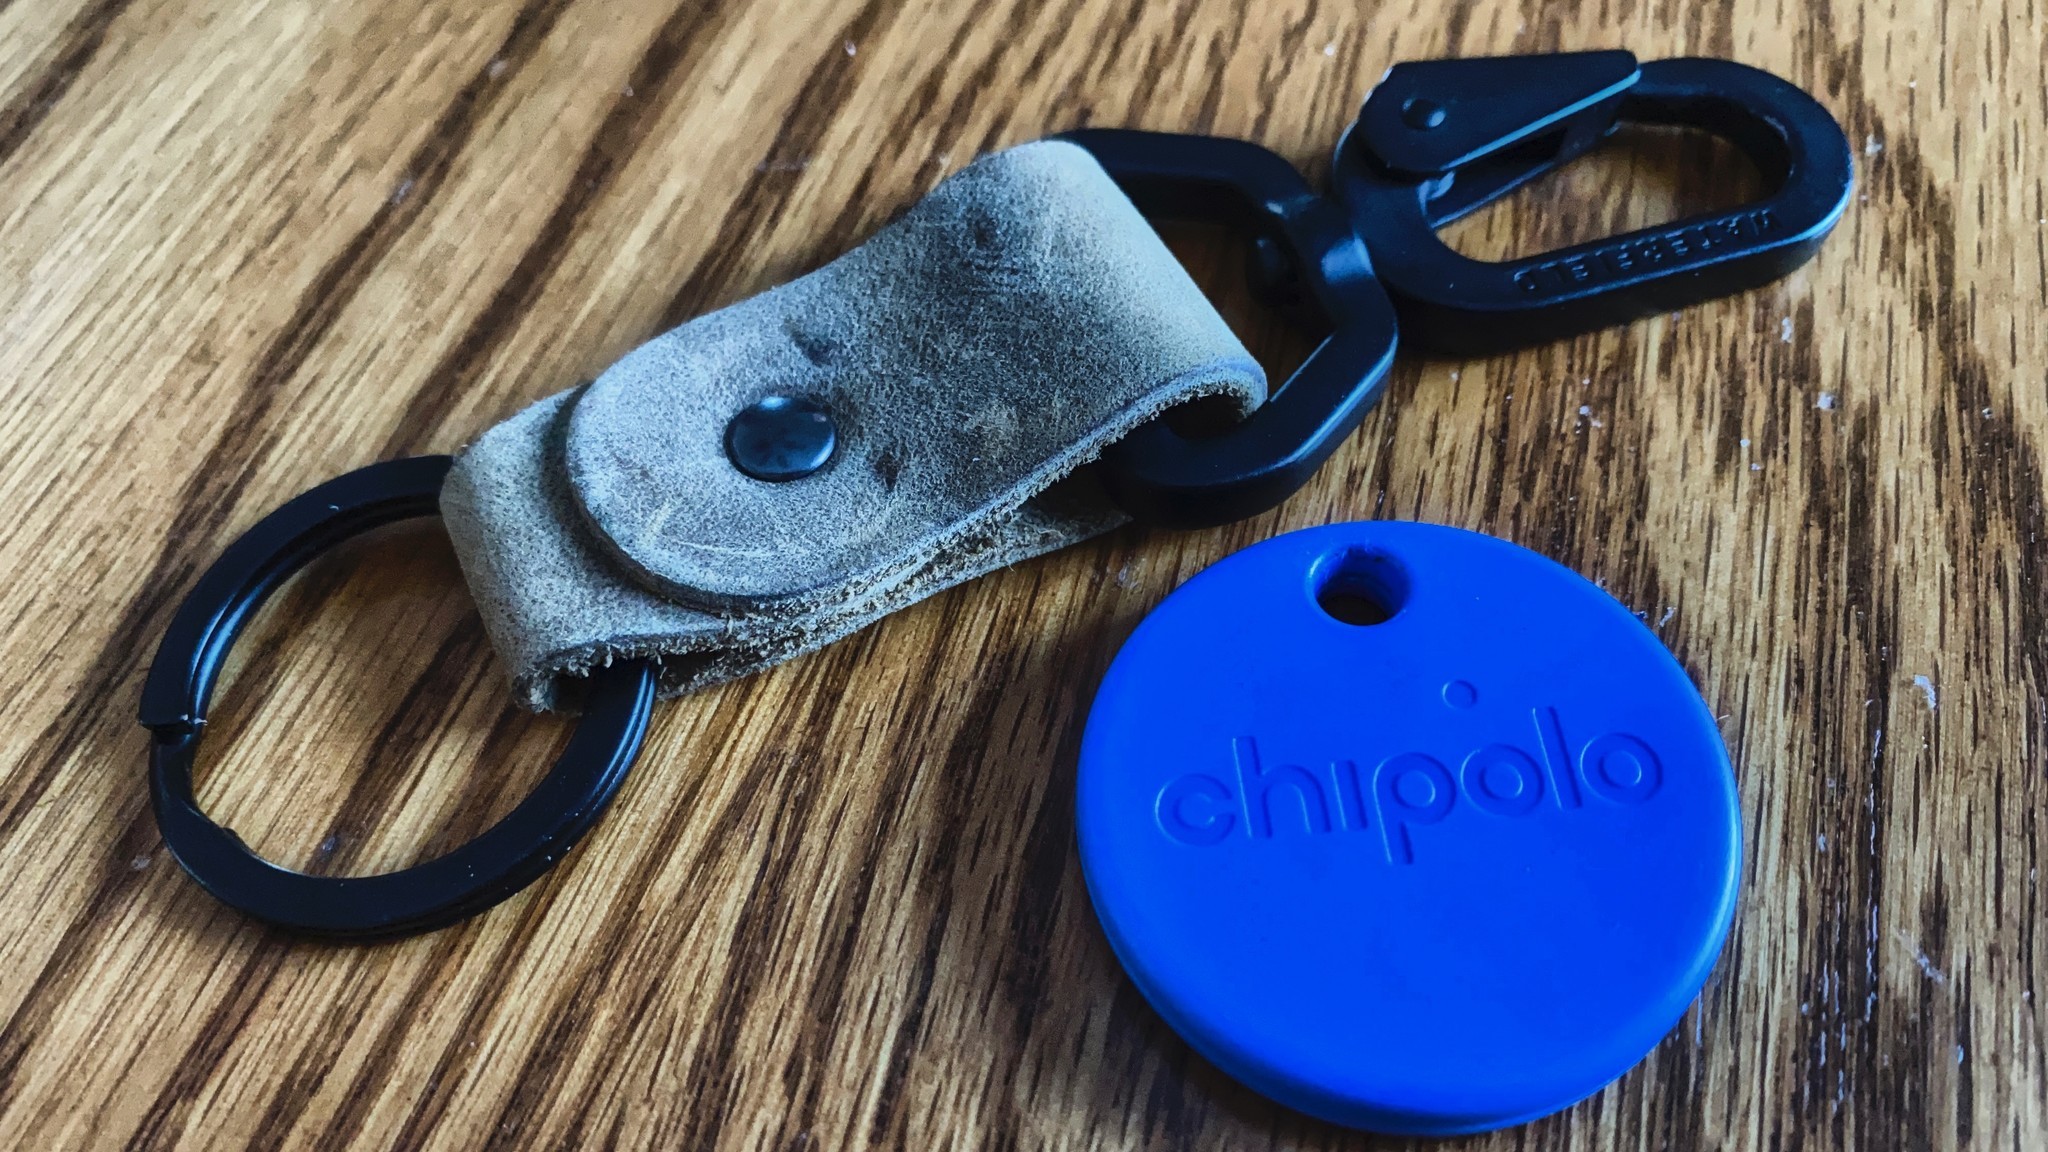 Chipolo One Review